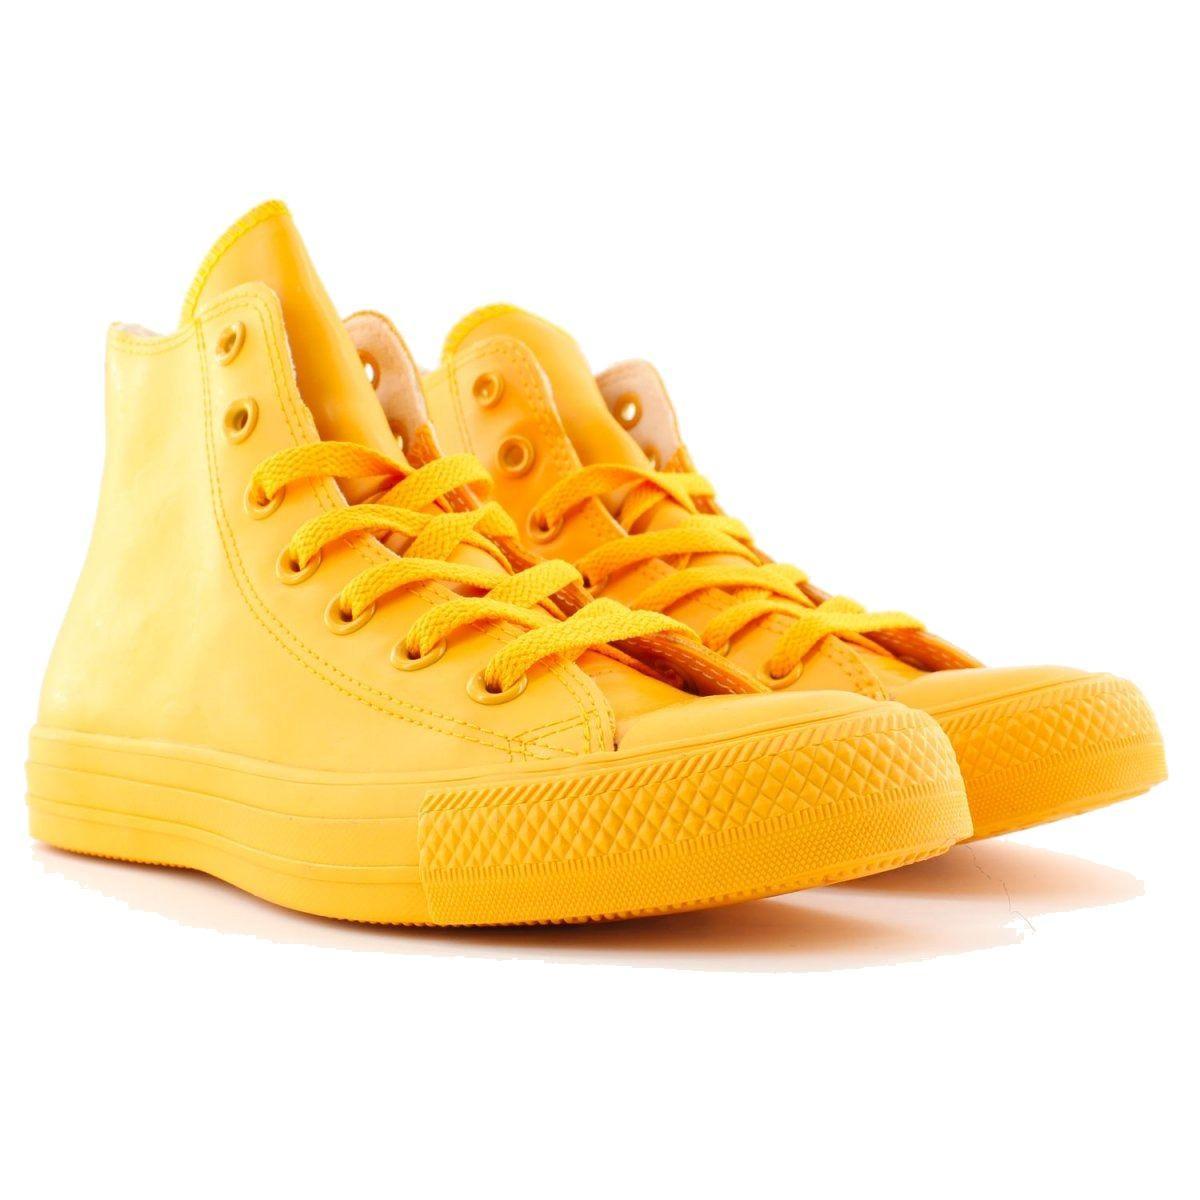 Converse Rubber Hi Top Sneakers in Yellow - Save 51% | Lyst